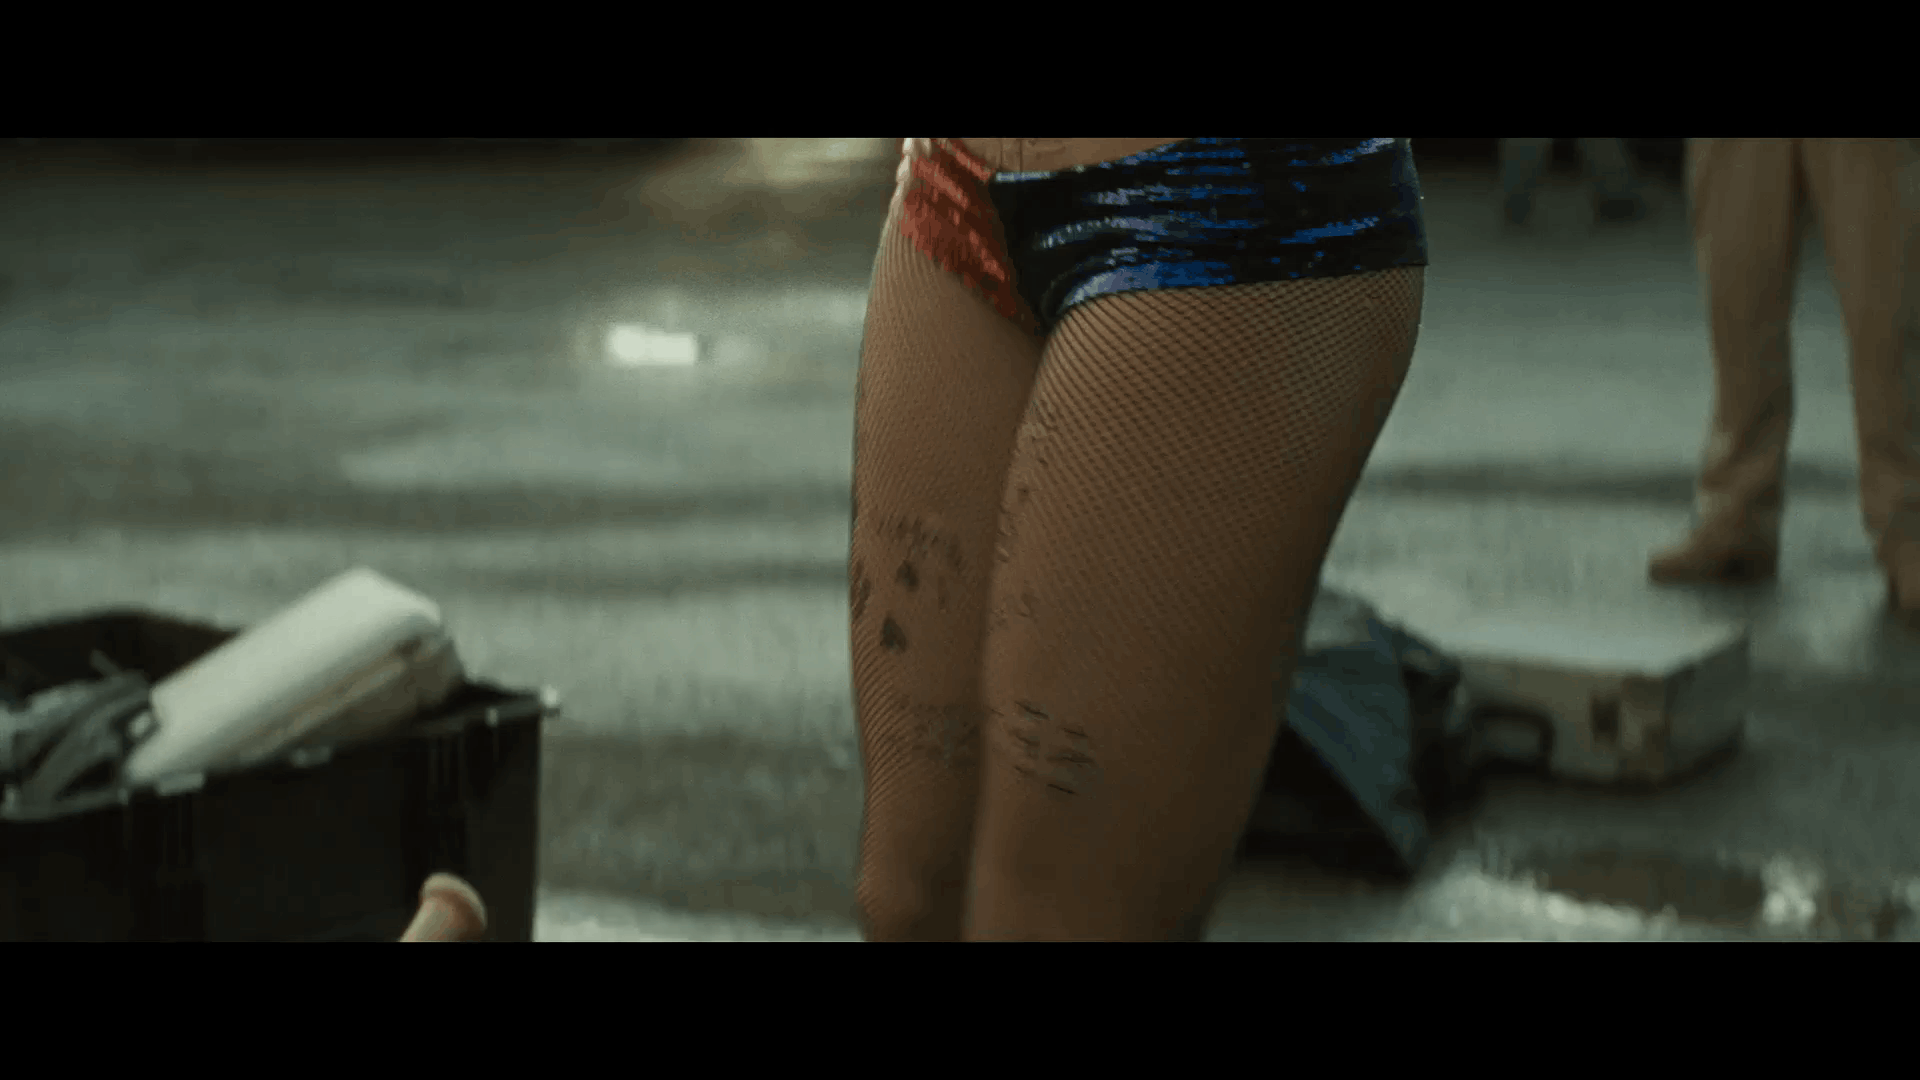 Harley quinn suicide squad GIF.